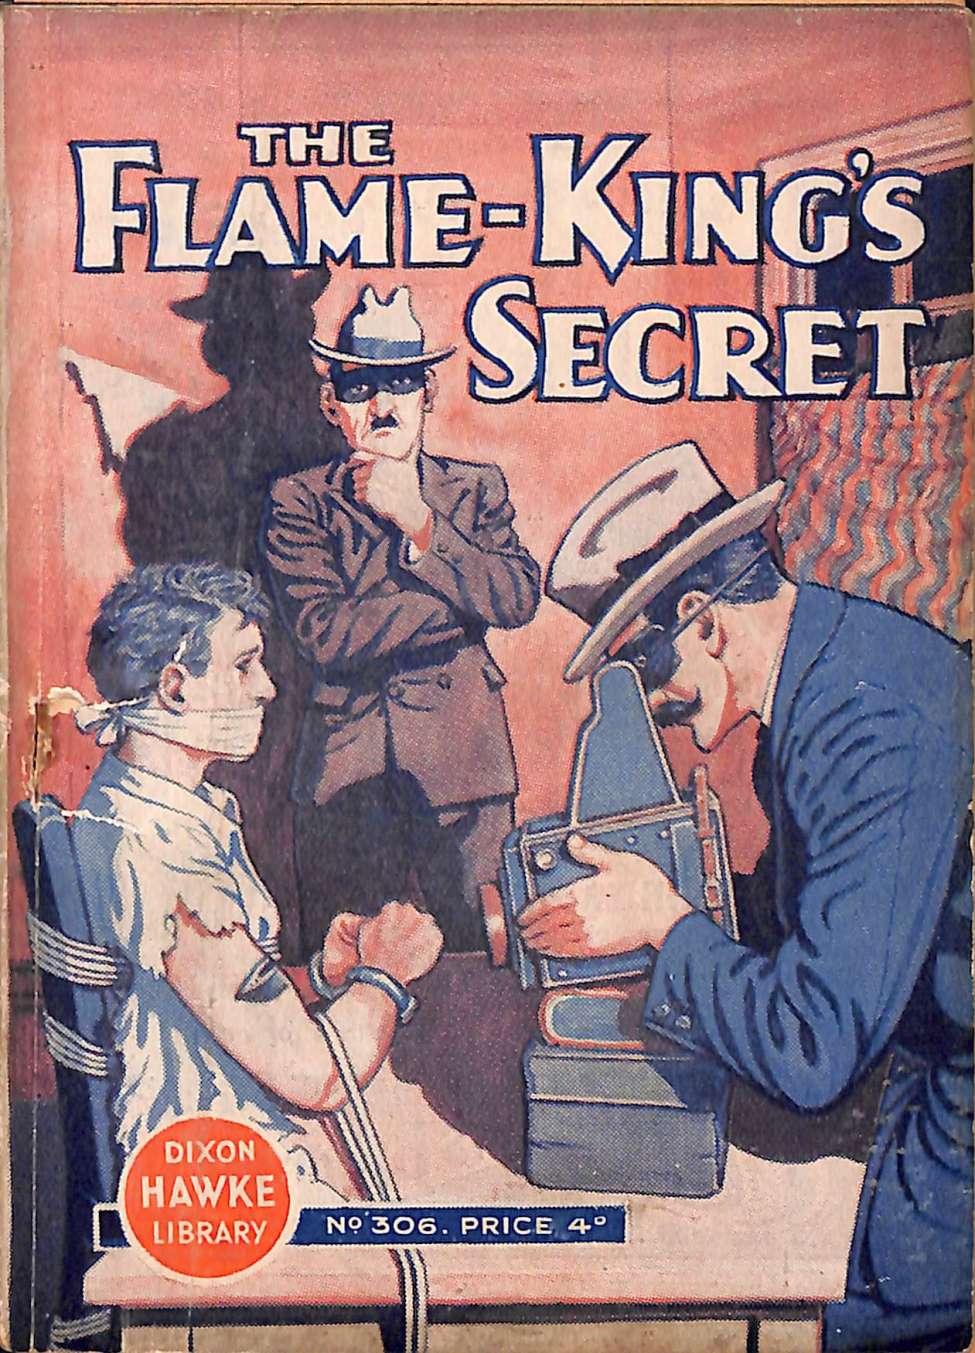 Comic Book Cover For Dixon Hawke Library 306 - The Flame-King's Secret